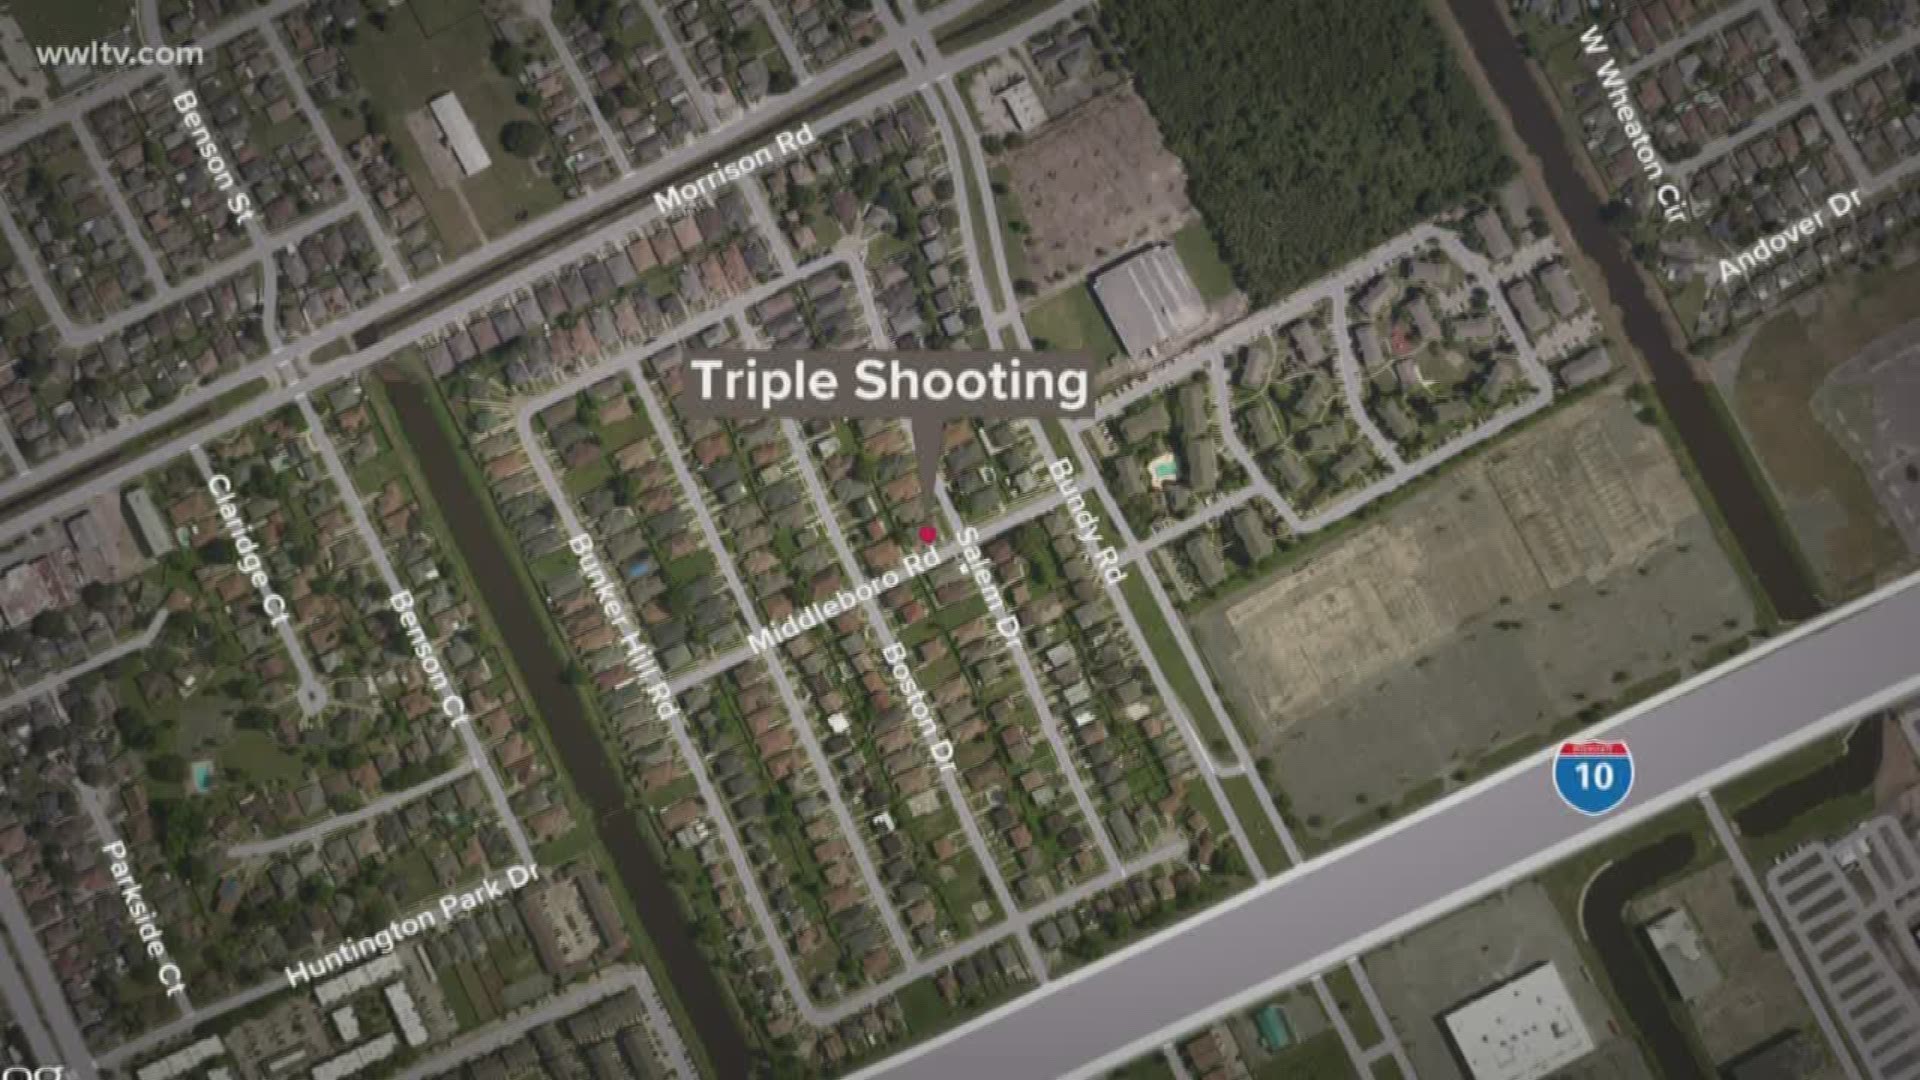 The shooting happened before 11:30 p.m. in the 7100 block of Salem Drive near Morrison and Bundy roads.